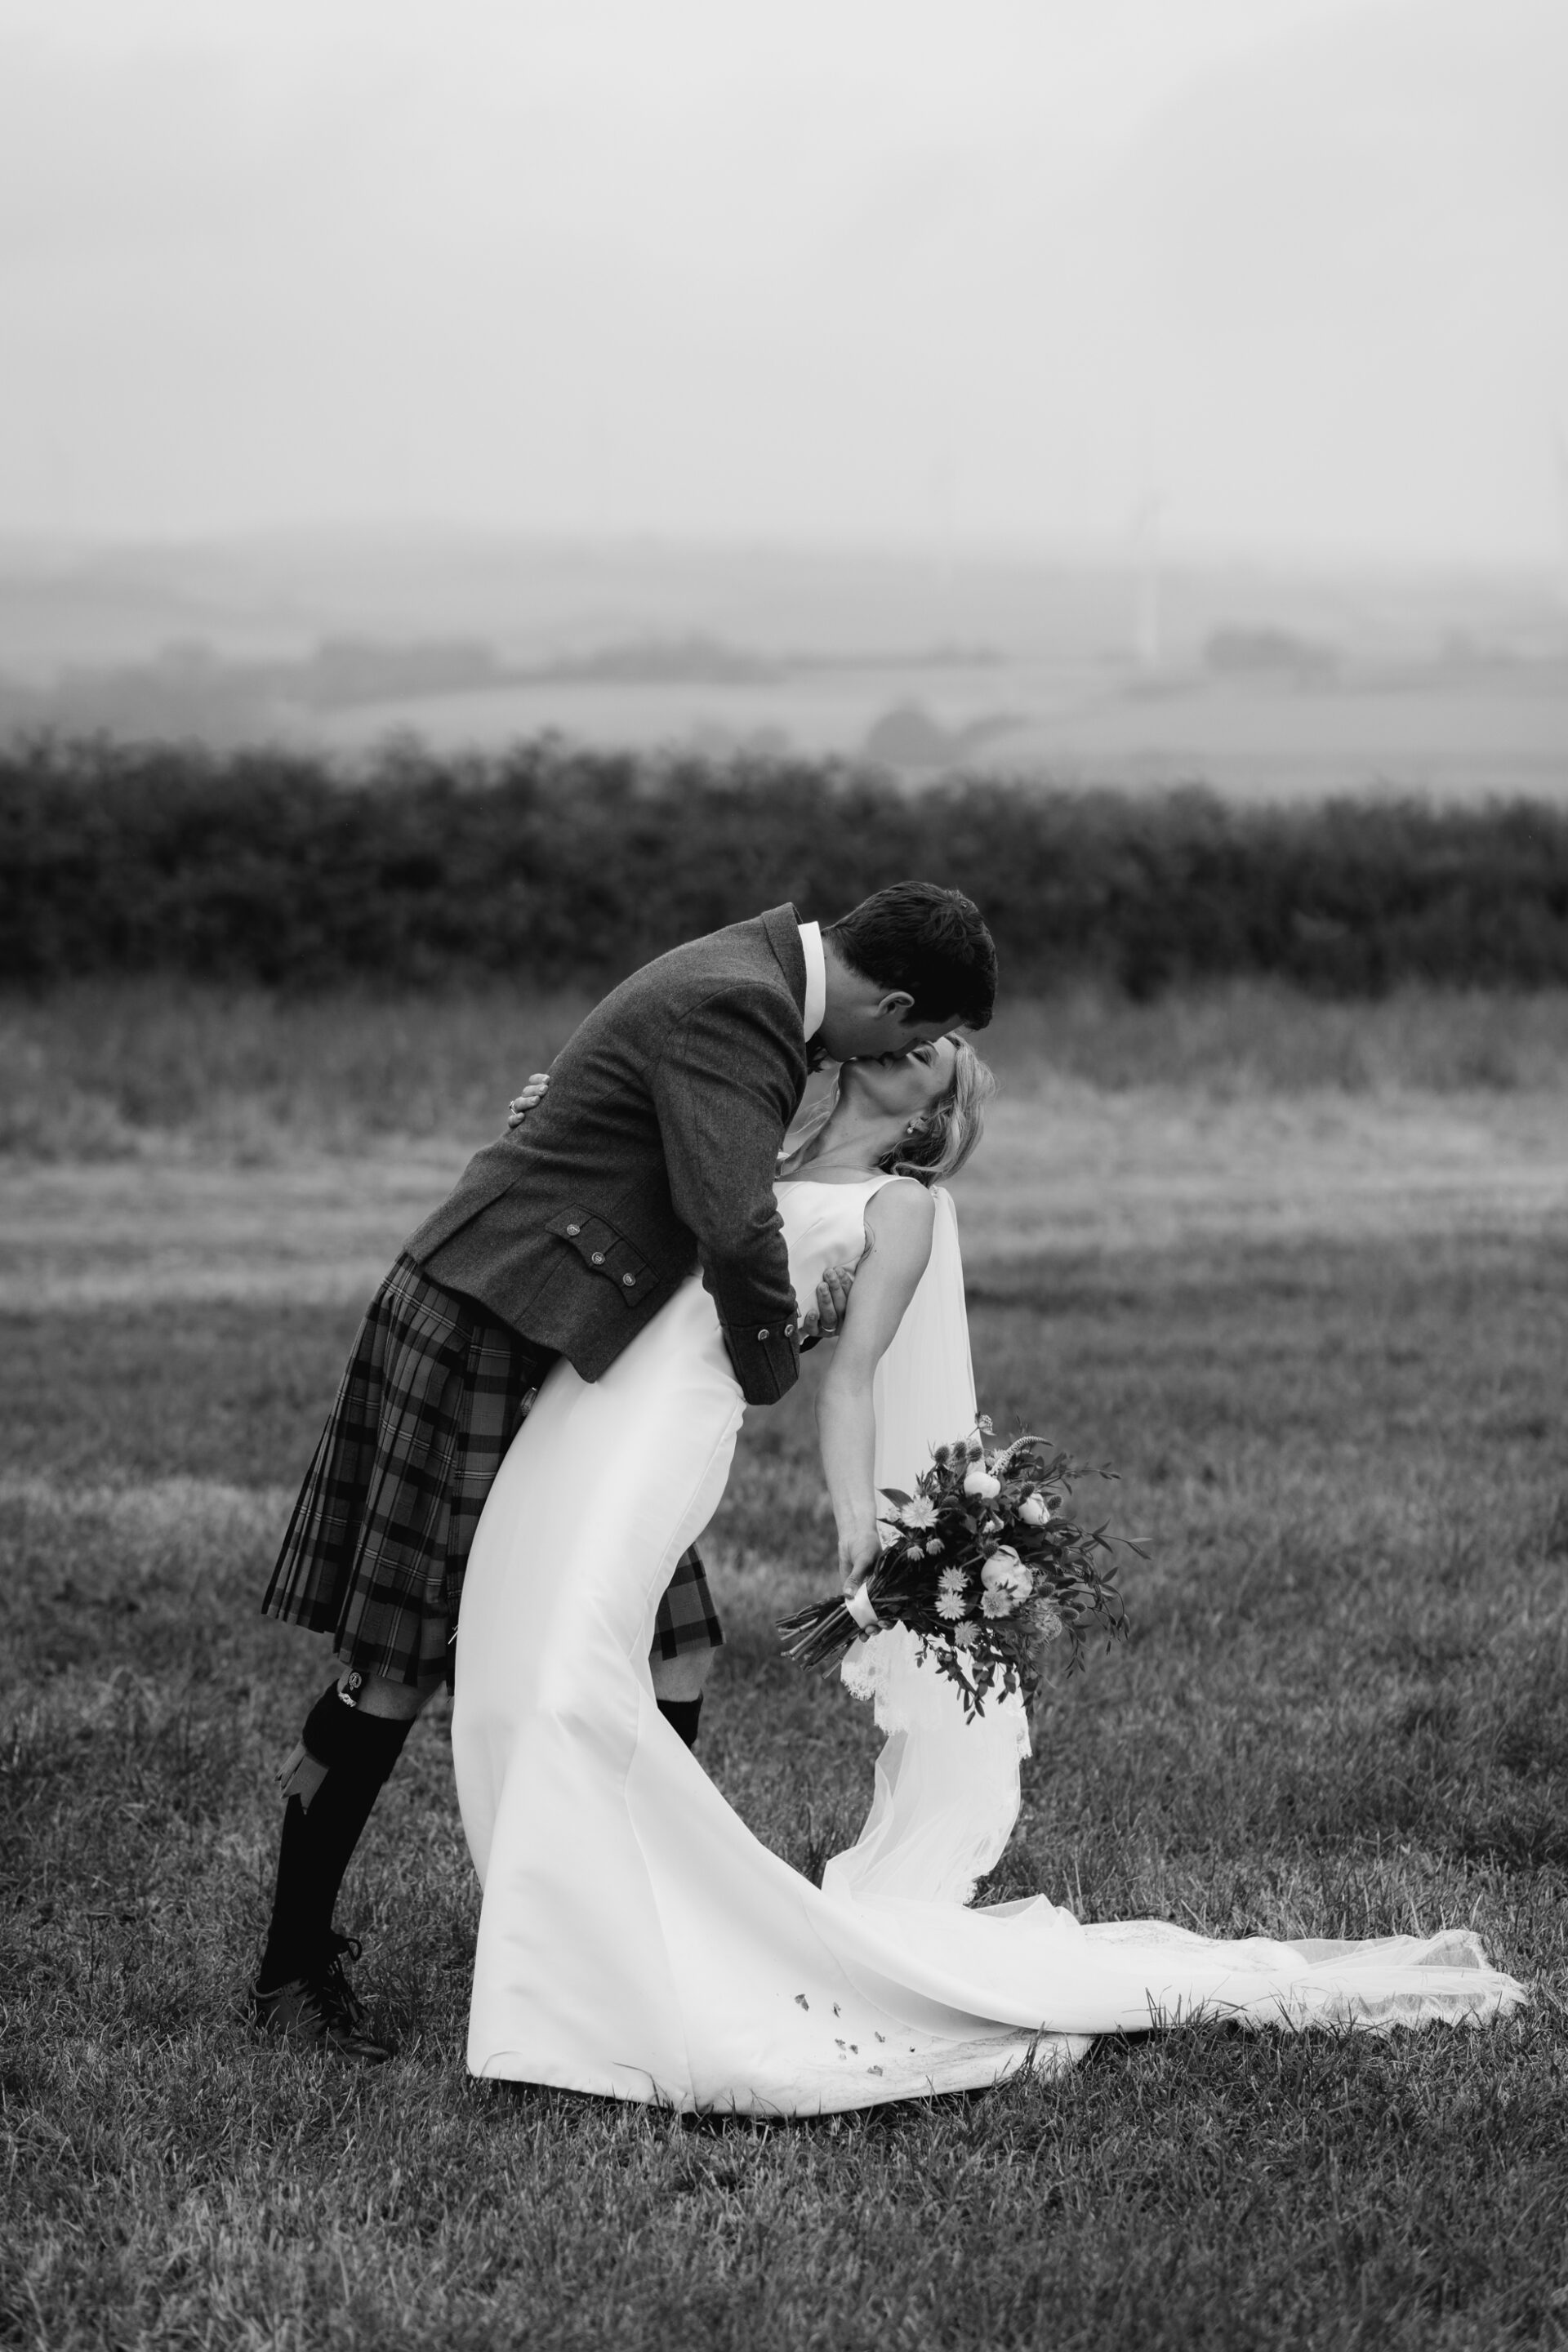 The bride and groom share a drop kiss during the couples portrait session